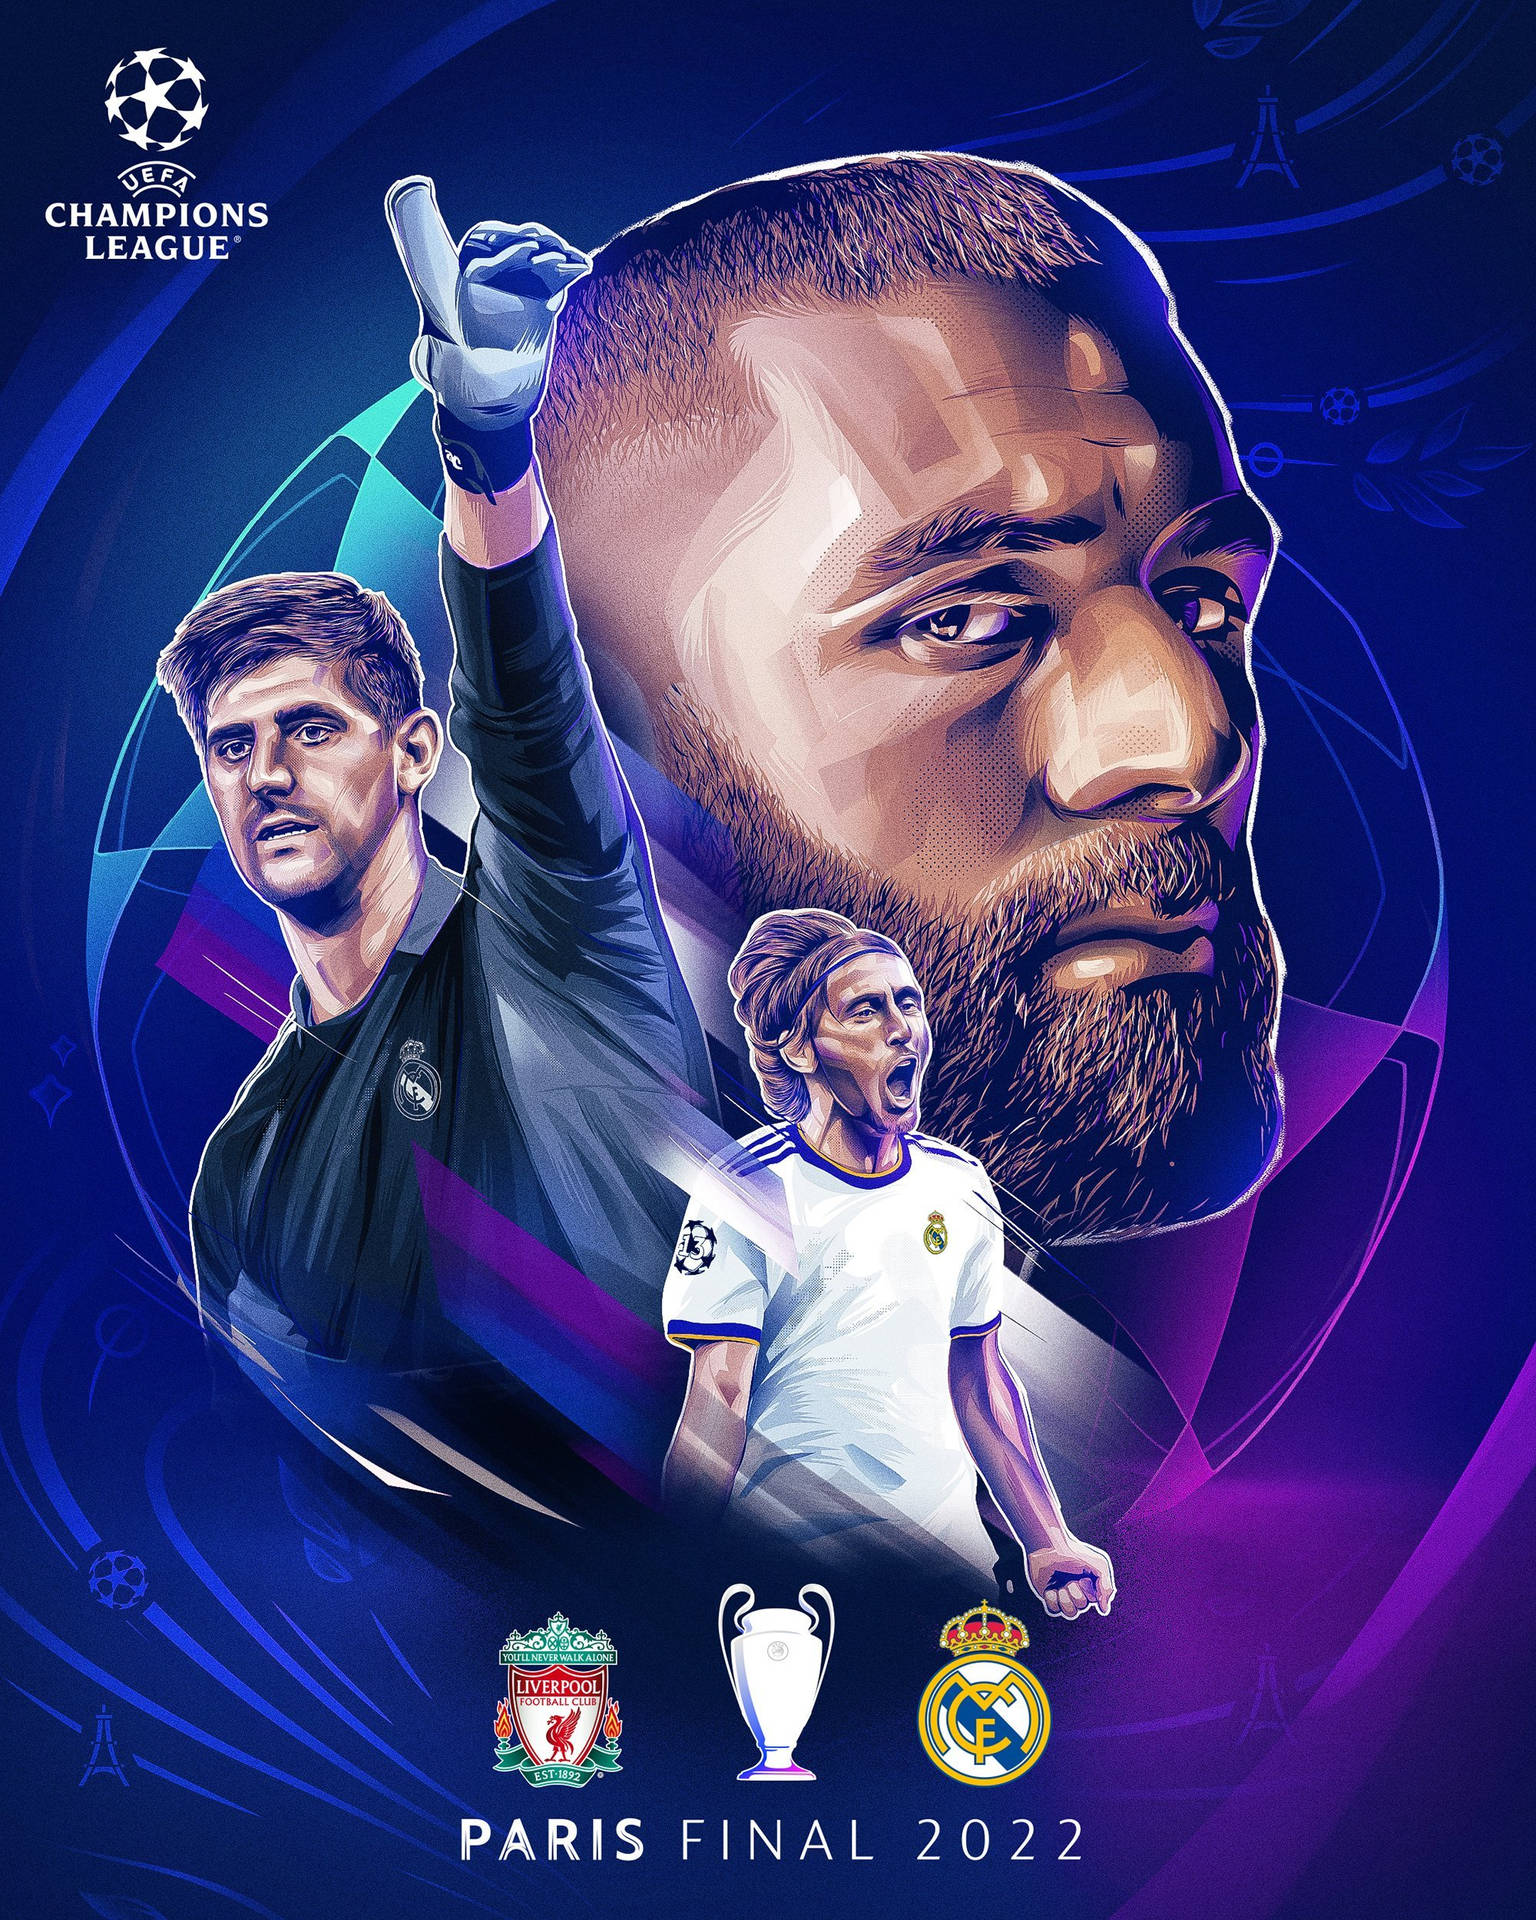 Champions League 2022 Finals Poster Background